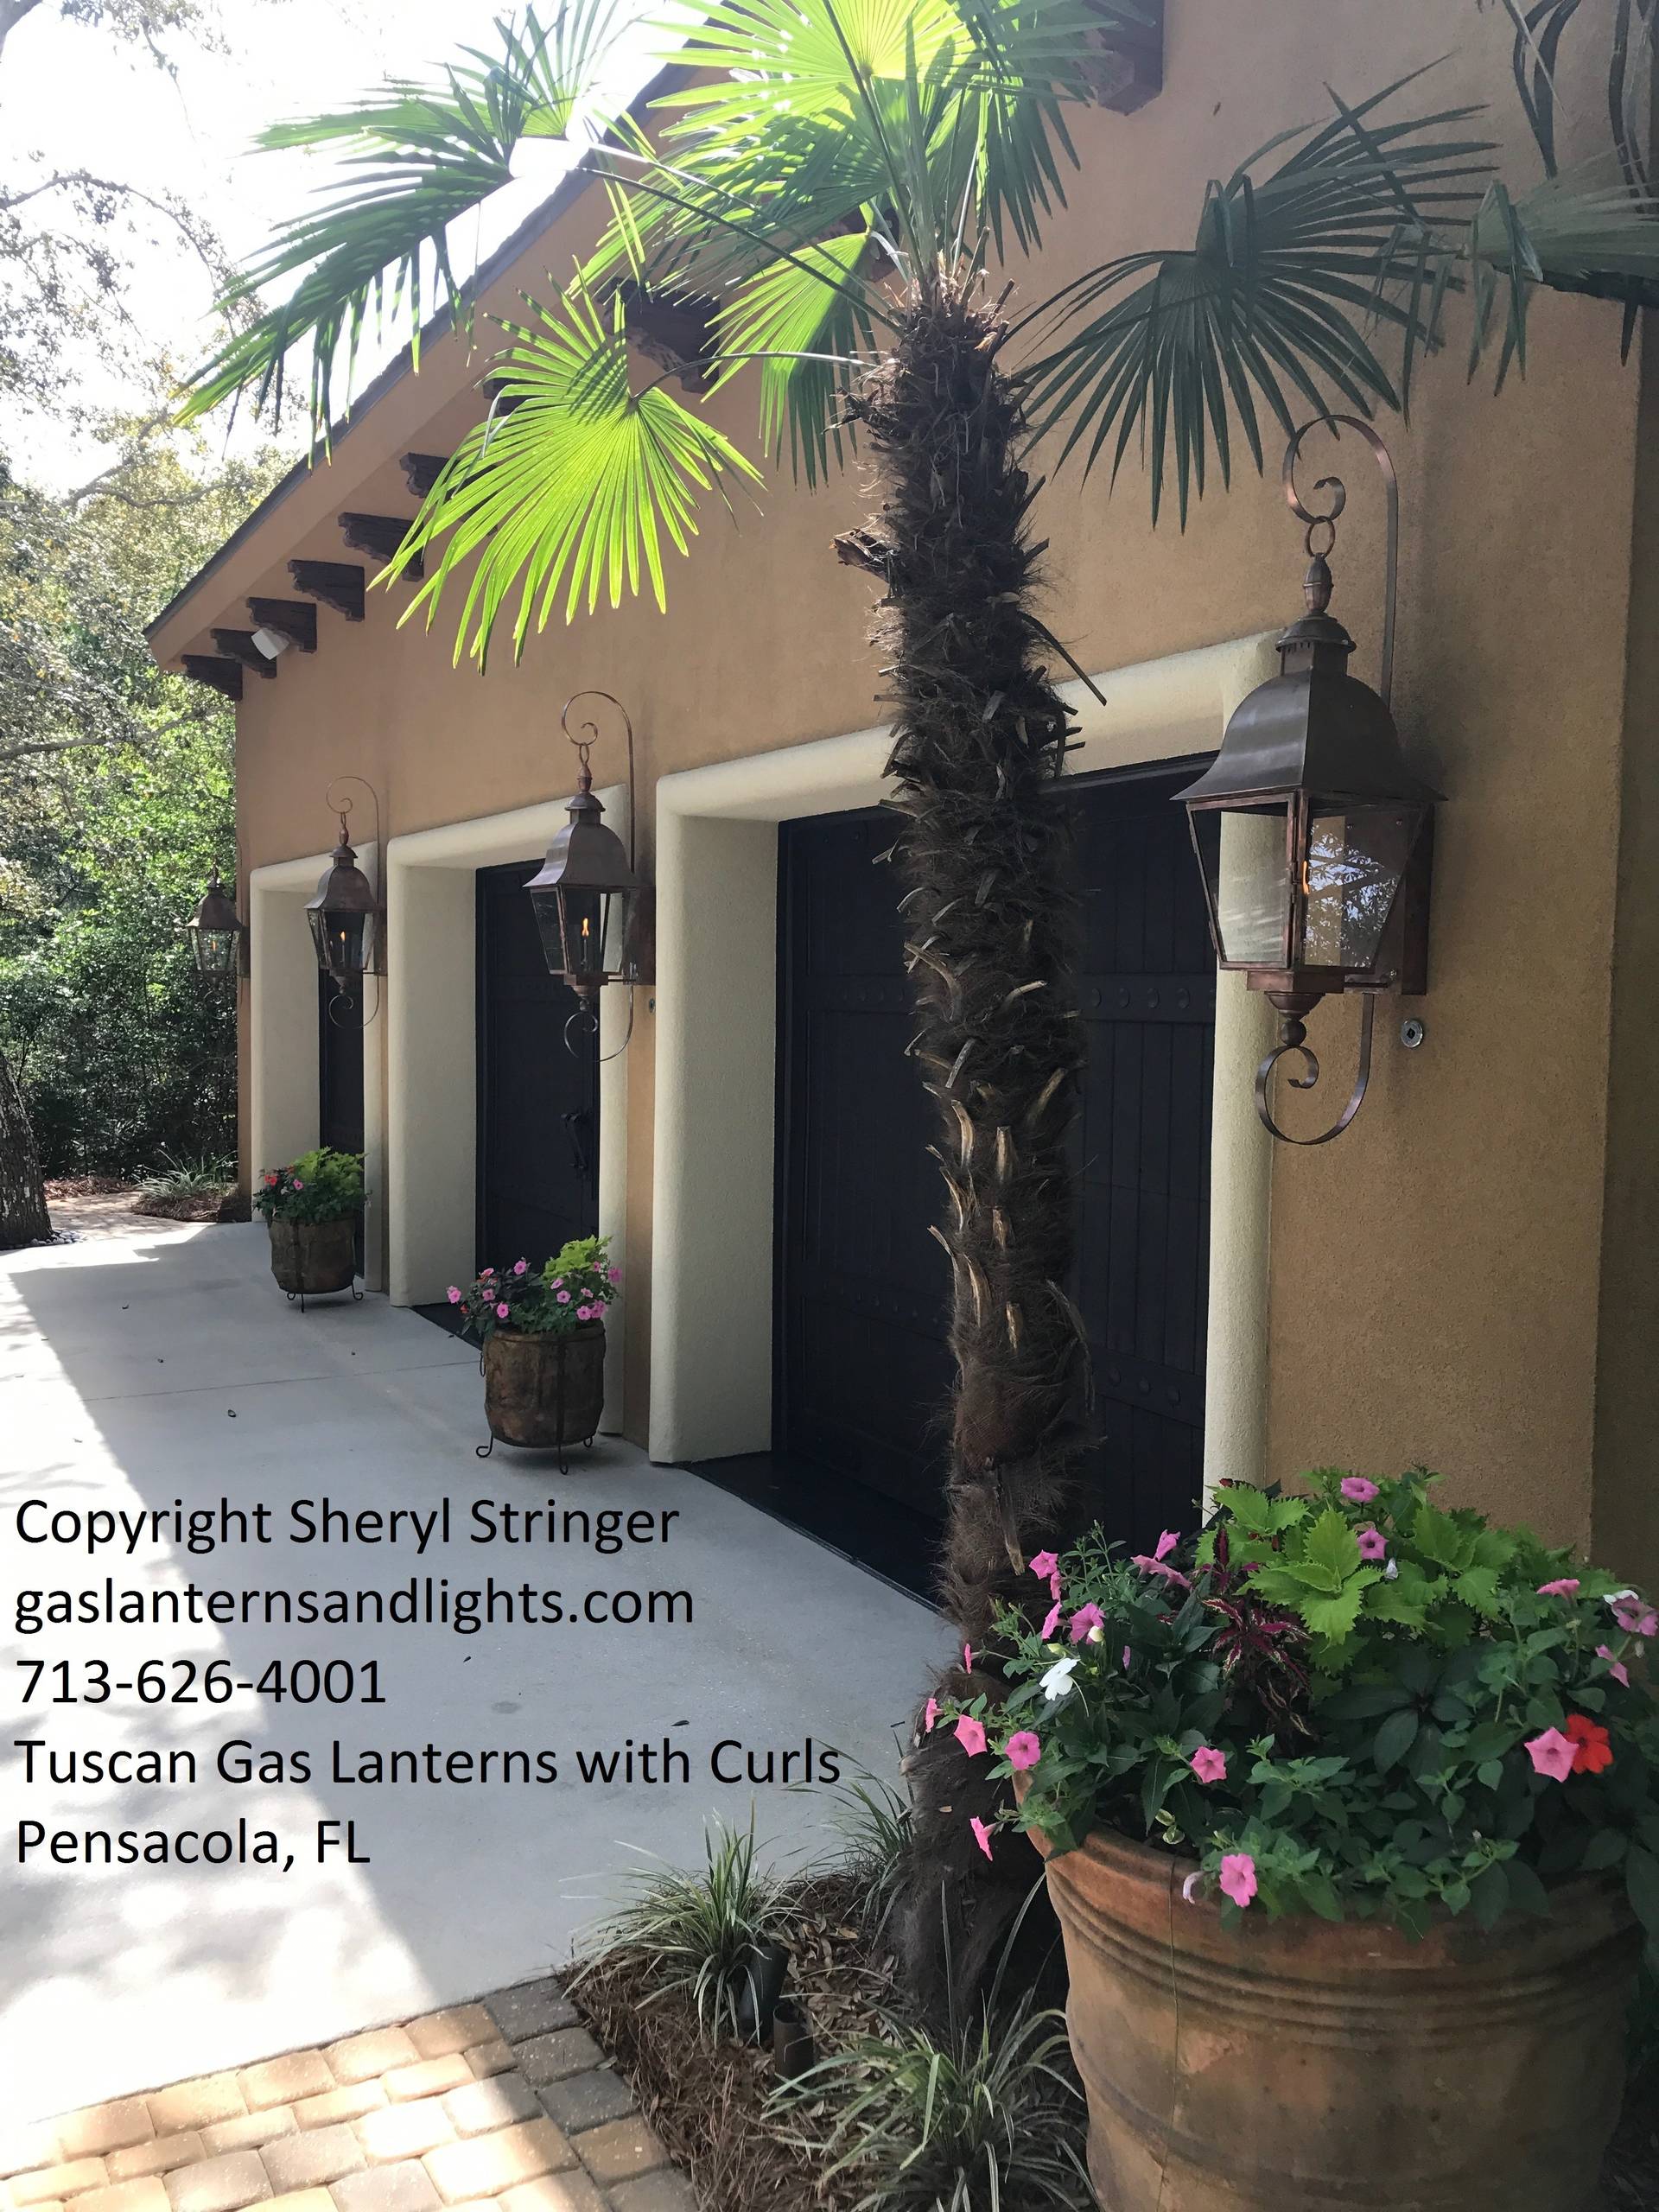 Sheryl's Tuscan Lanterns with Copper Curls